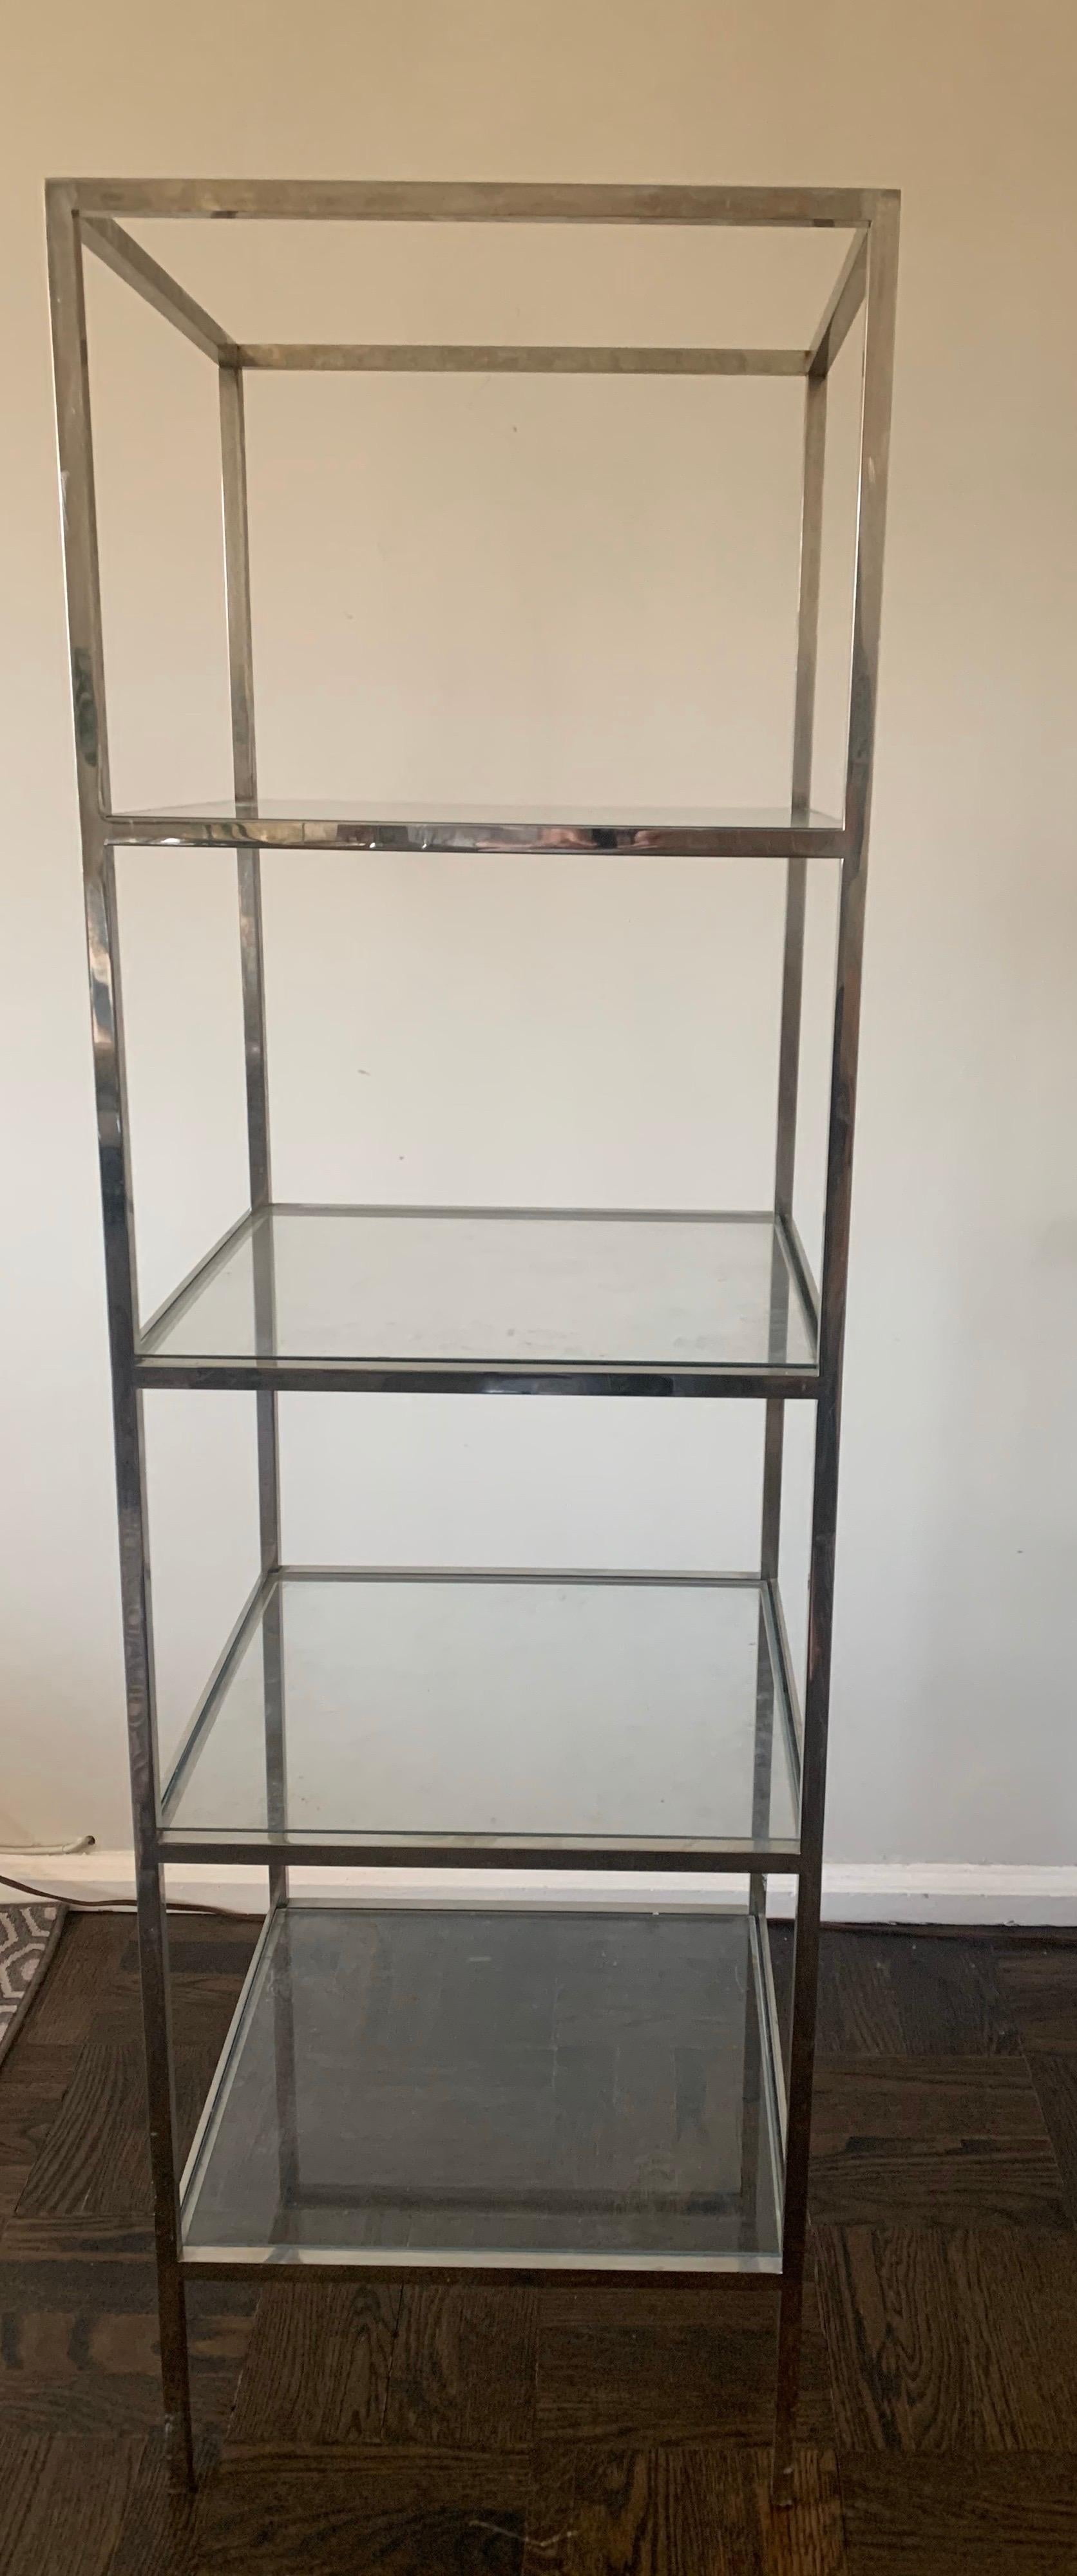 1970s polished chrome étagère or bookcase with 4 square glass shelves. Very heavy solid chrome construction with thick clear glass shelves. Each shelf is 12.5” tall.